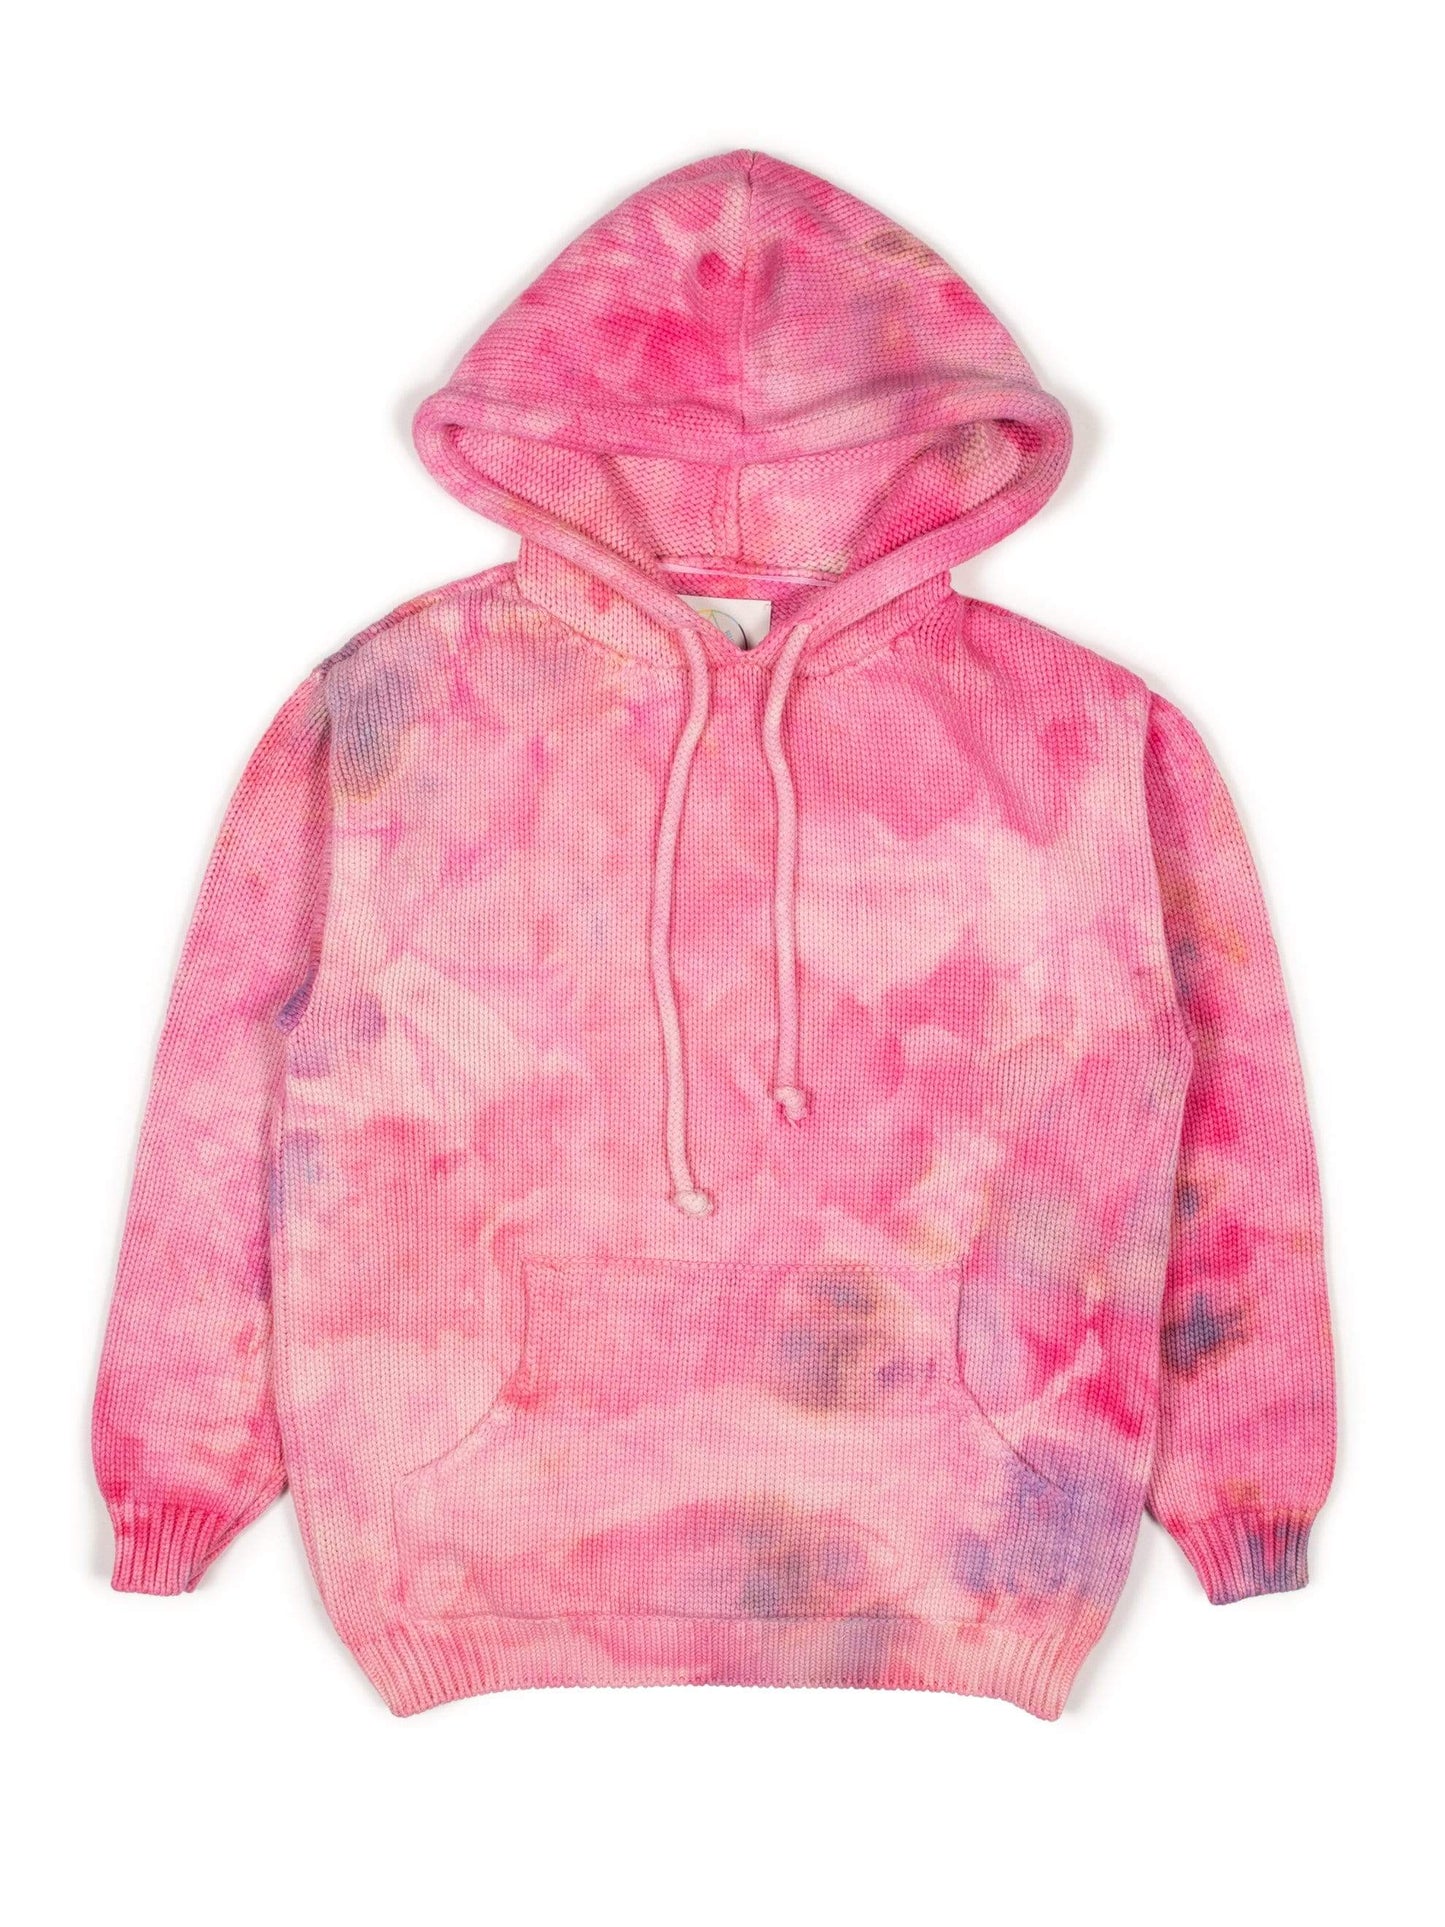 Camp High S/M / Pink Jersey Knit Hoody